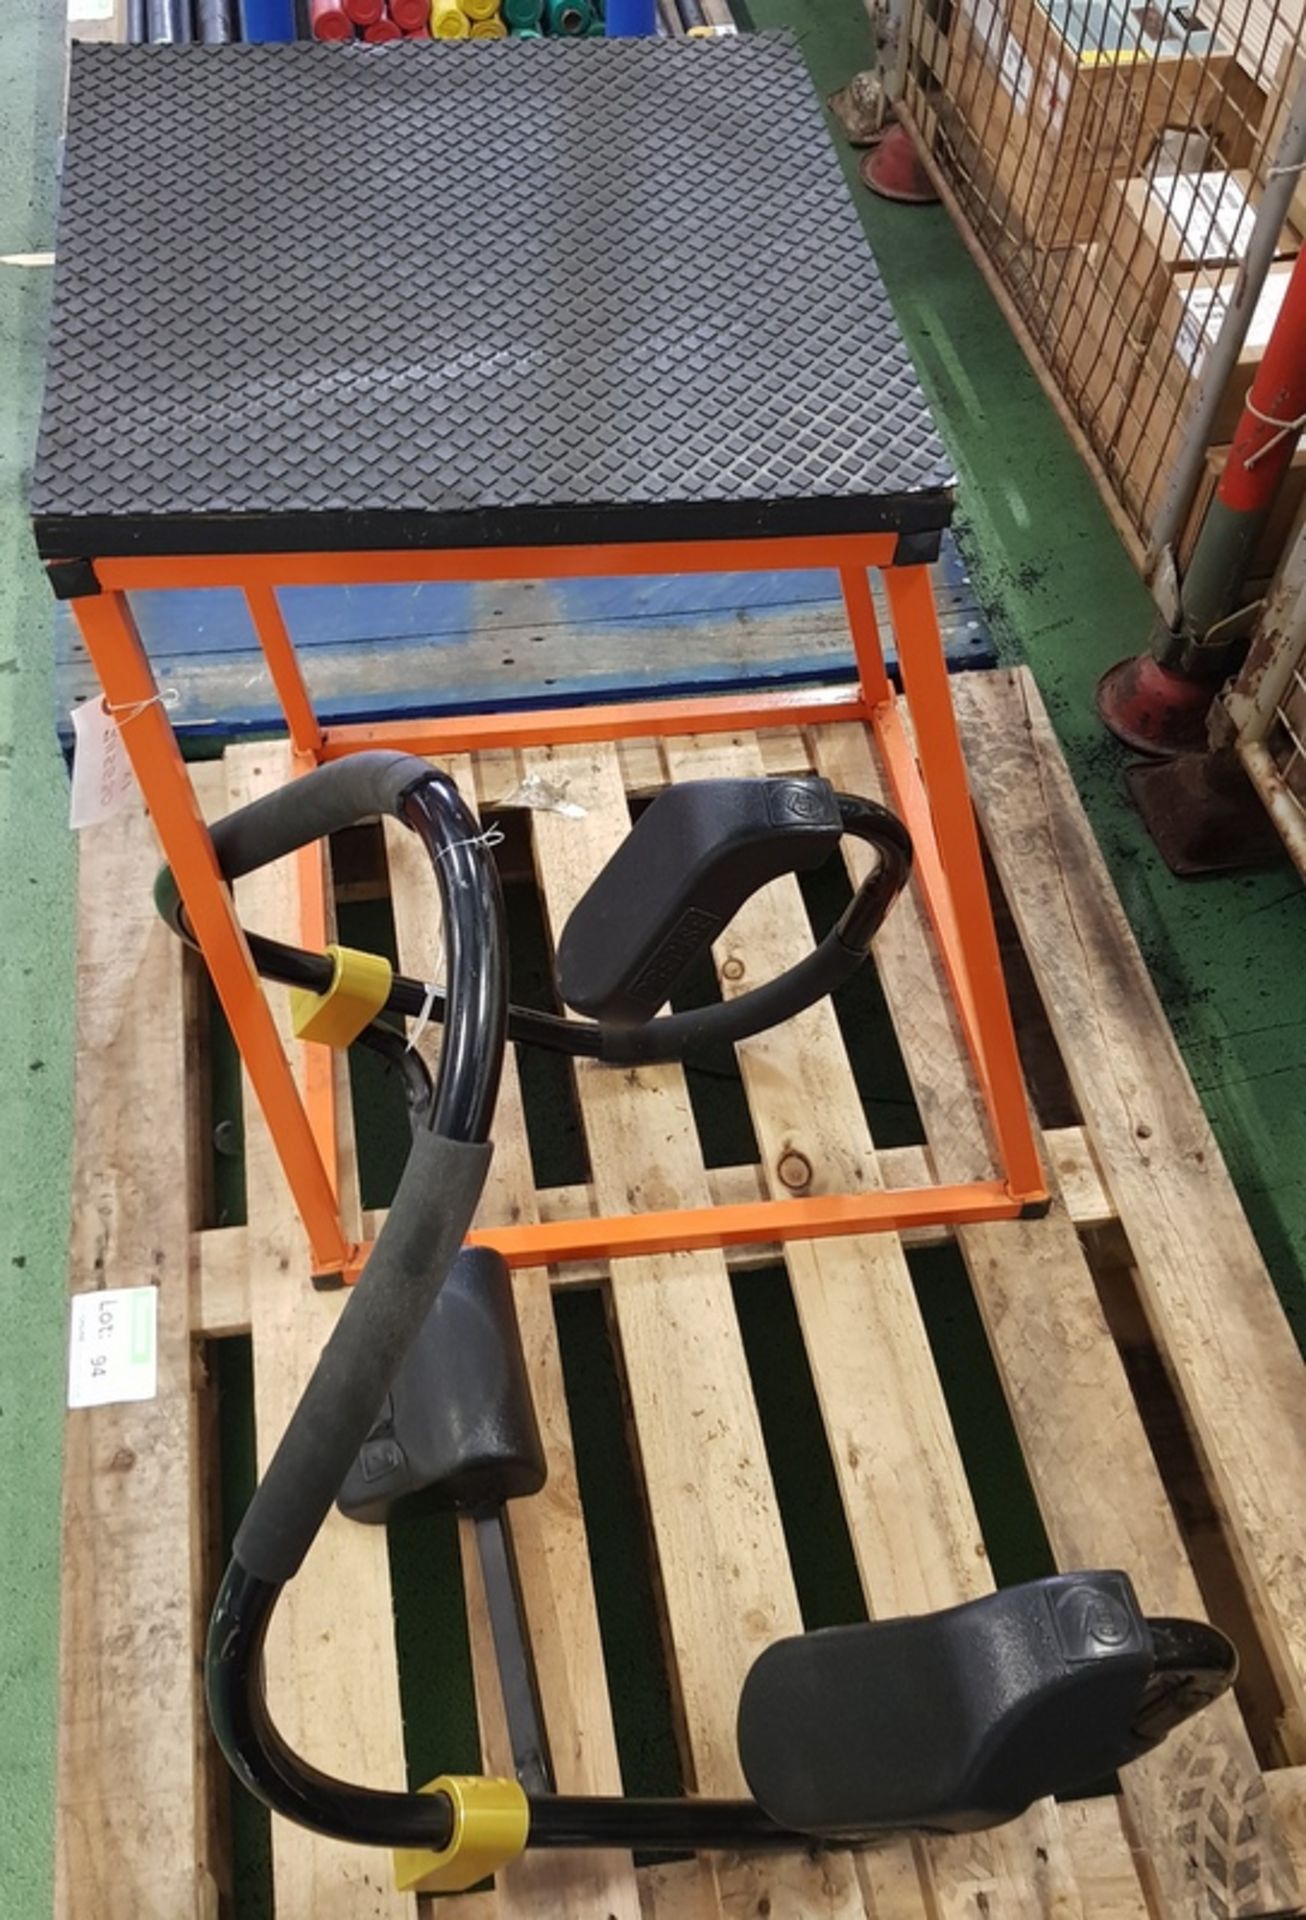 Precise Scrunch Exercise.Unit, Metal Frame Bench - Image 2 of 3